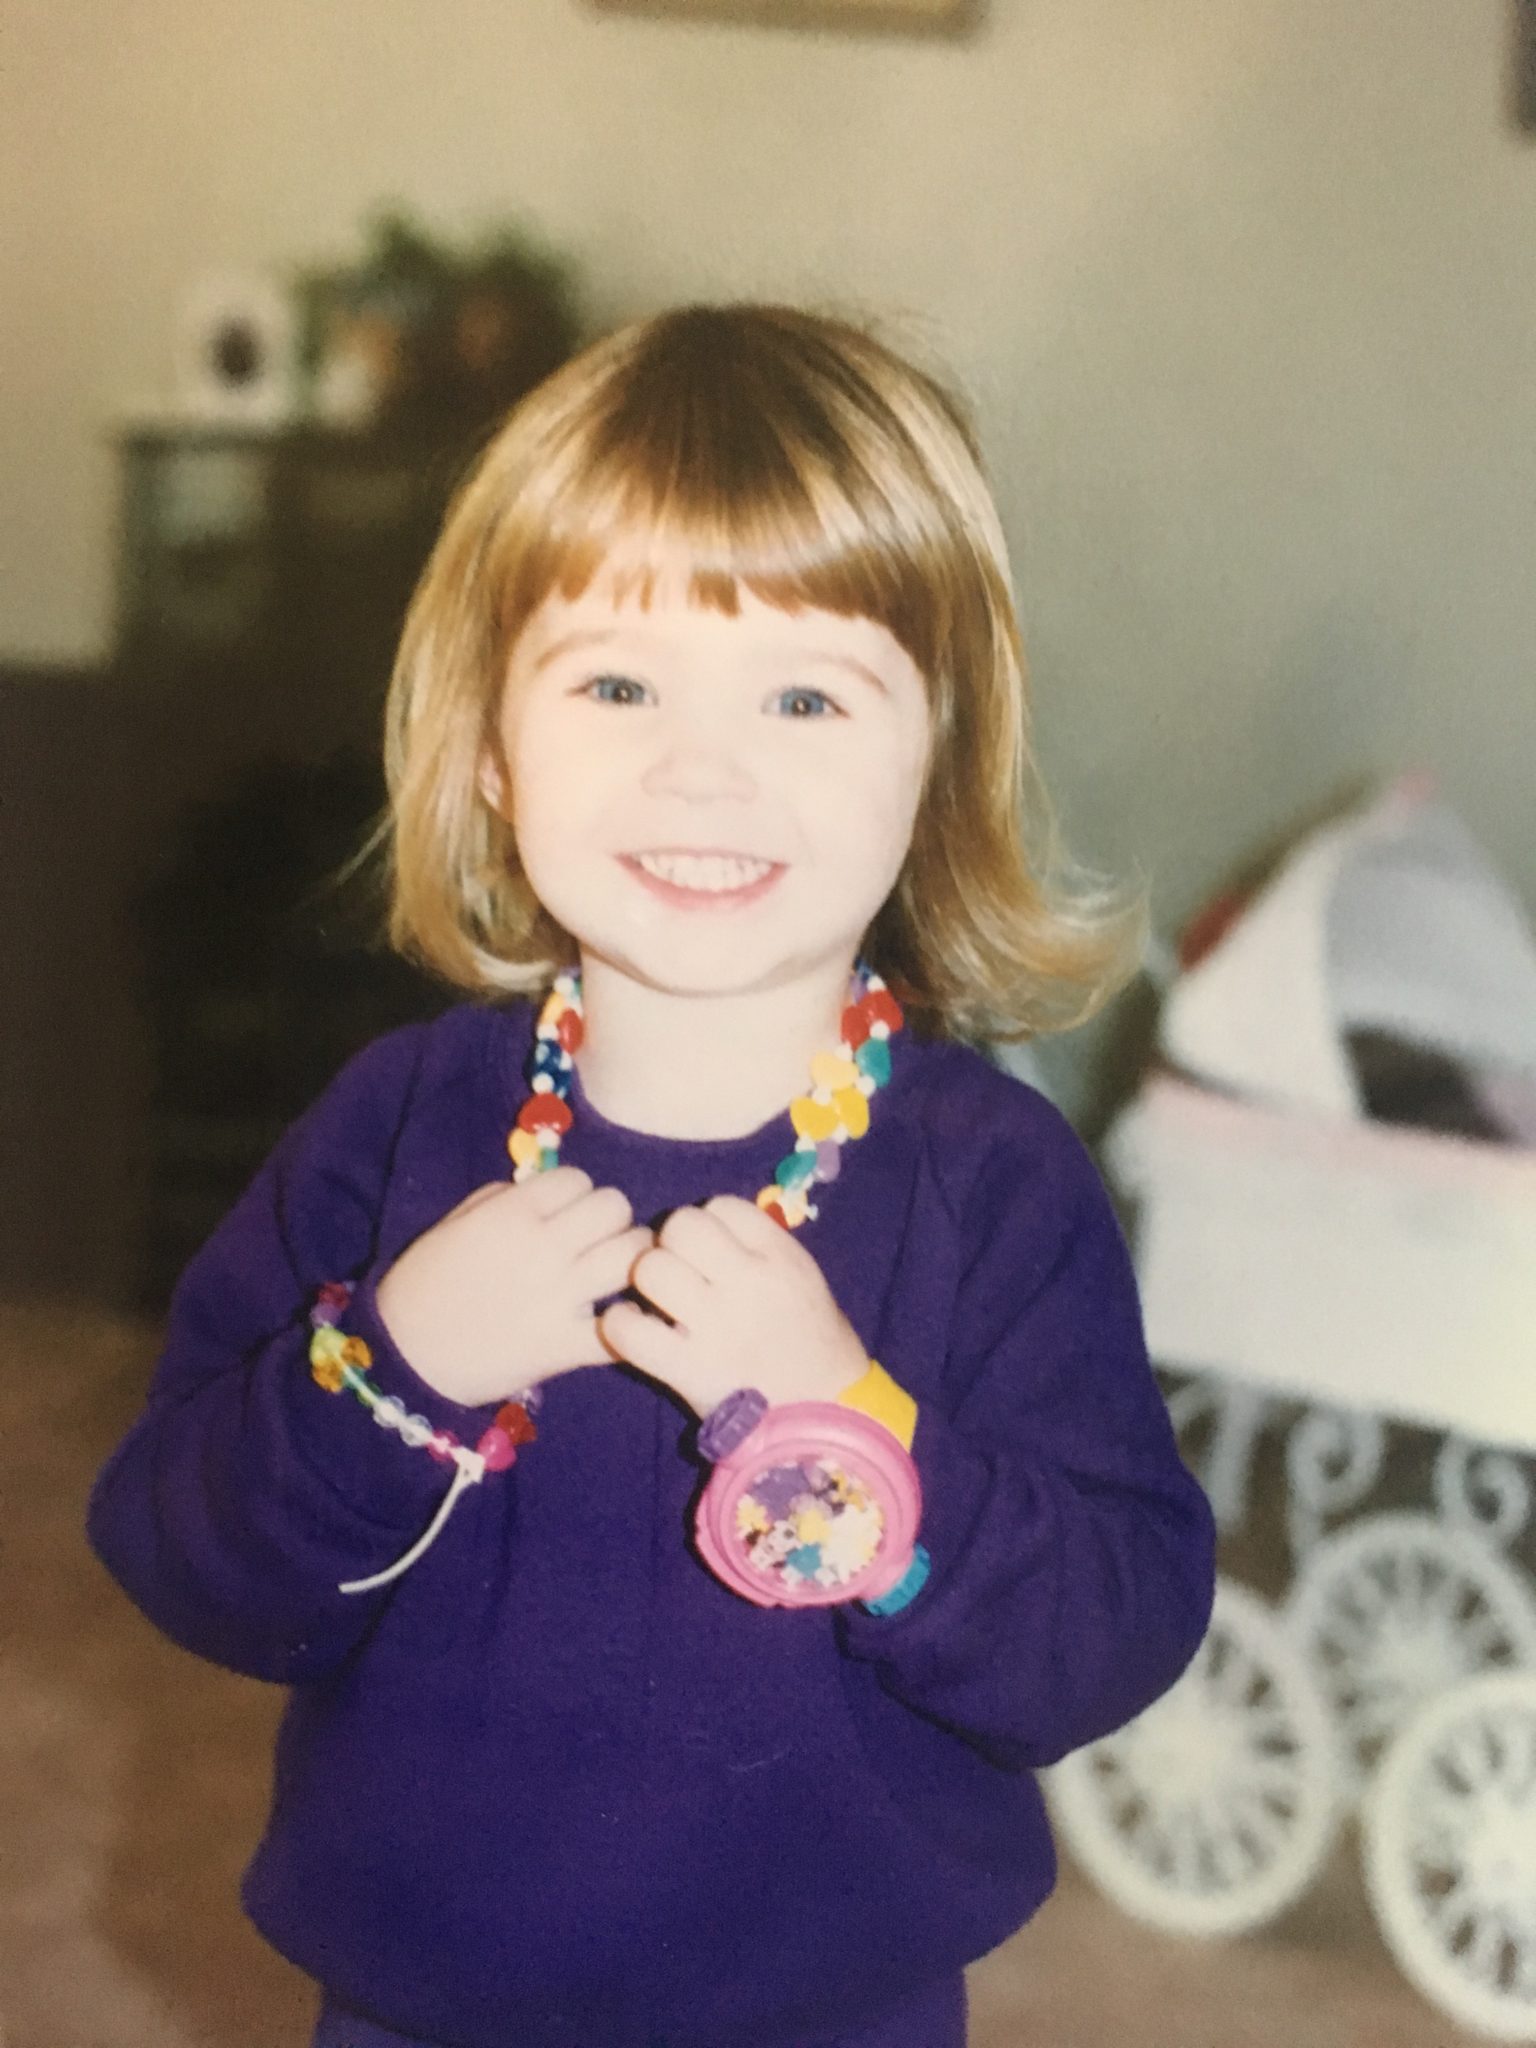 Speech Language Pathologist Laura Strenk as a girl, wearing a purple sweater with toy jewelry